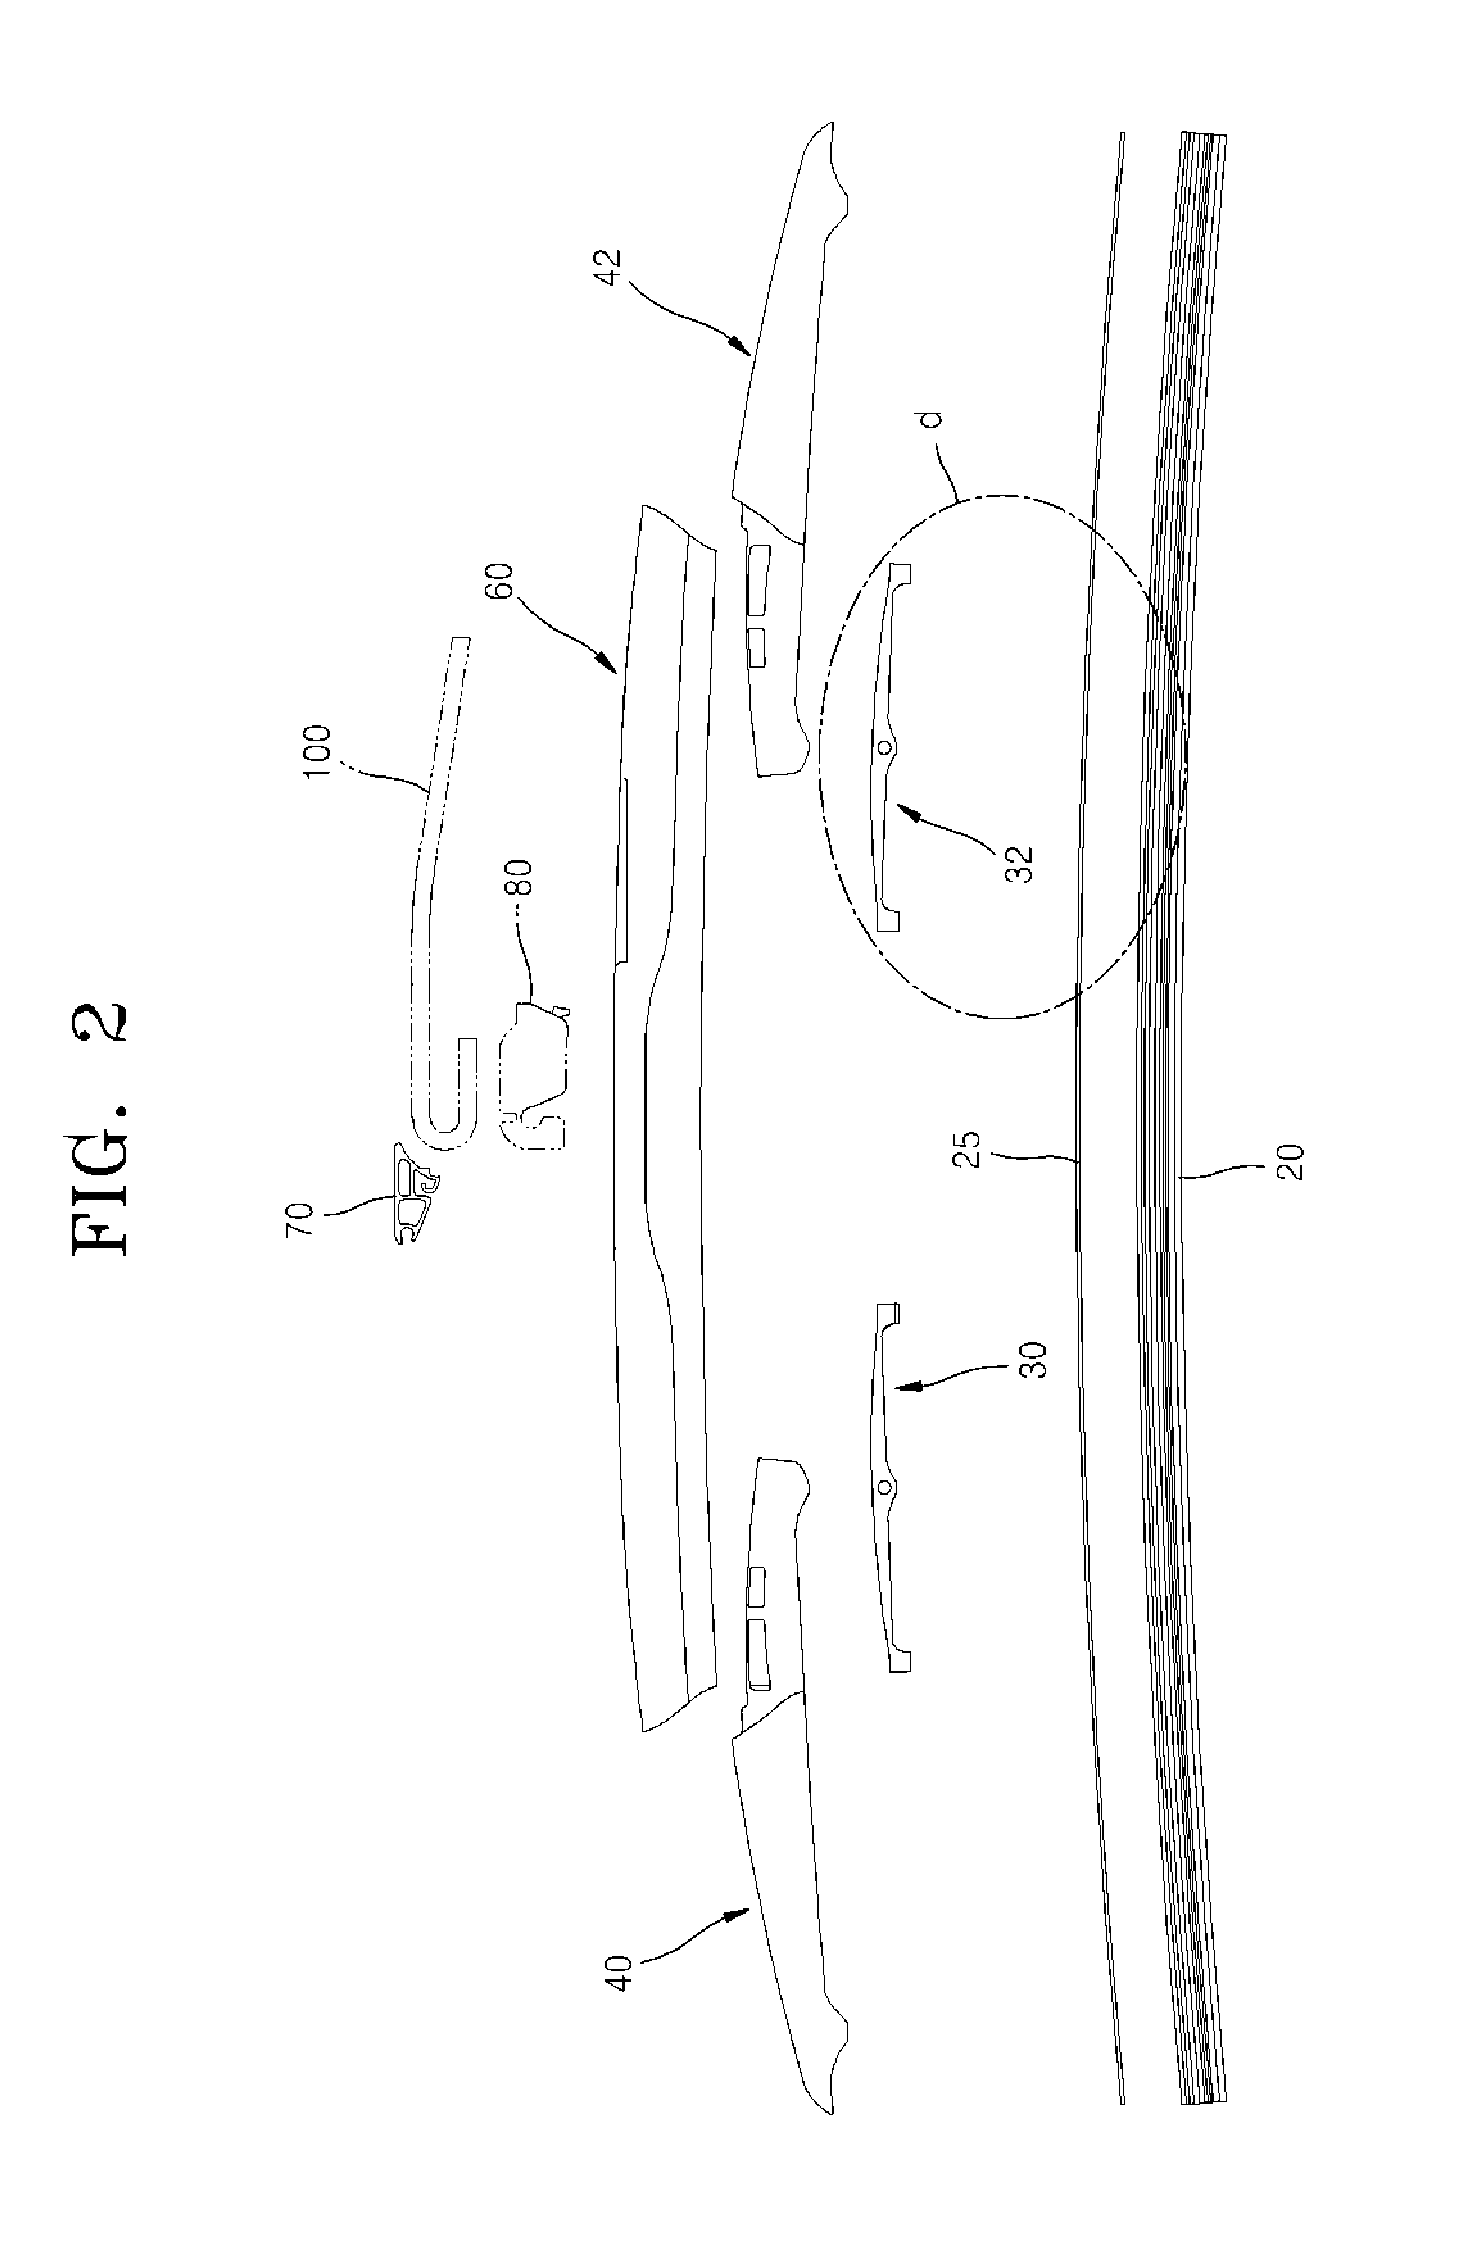 Wiper For Vehicle Having Improved Assembling Efficiency And Reduced Weight